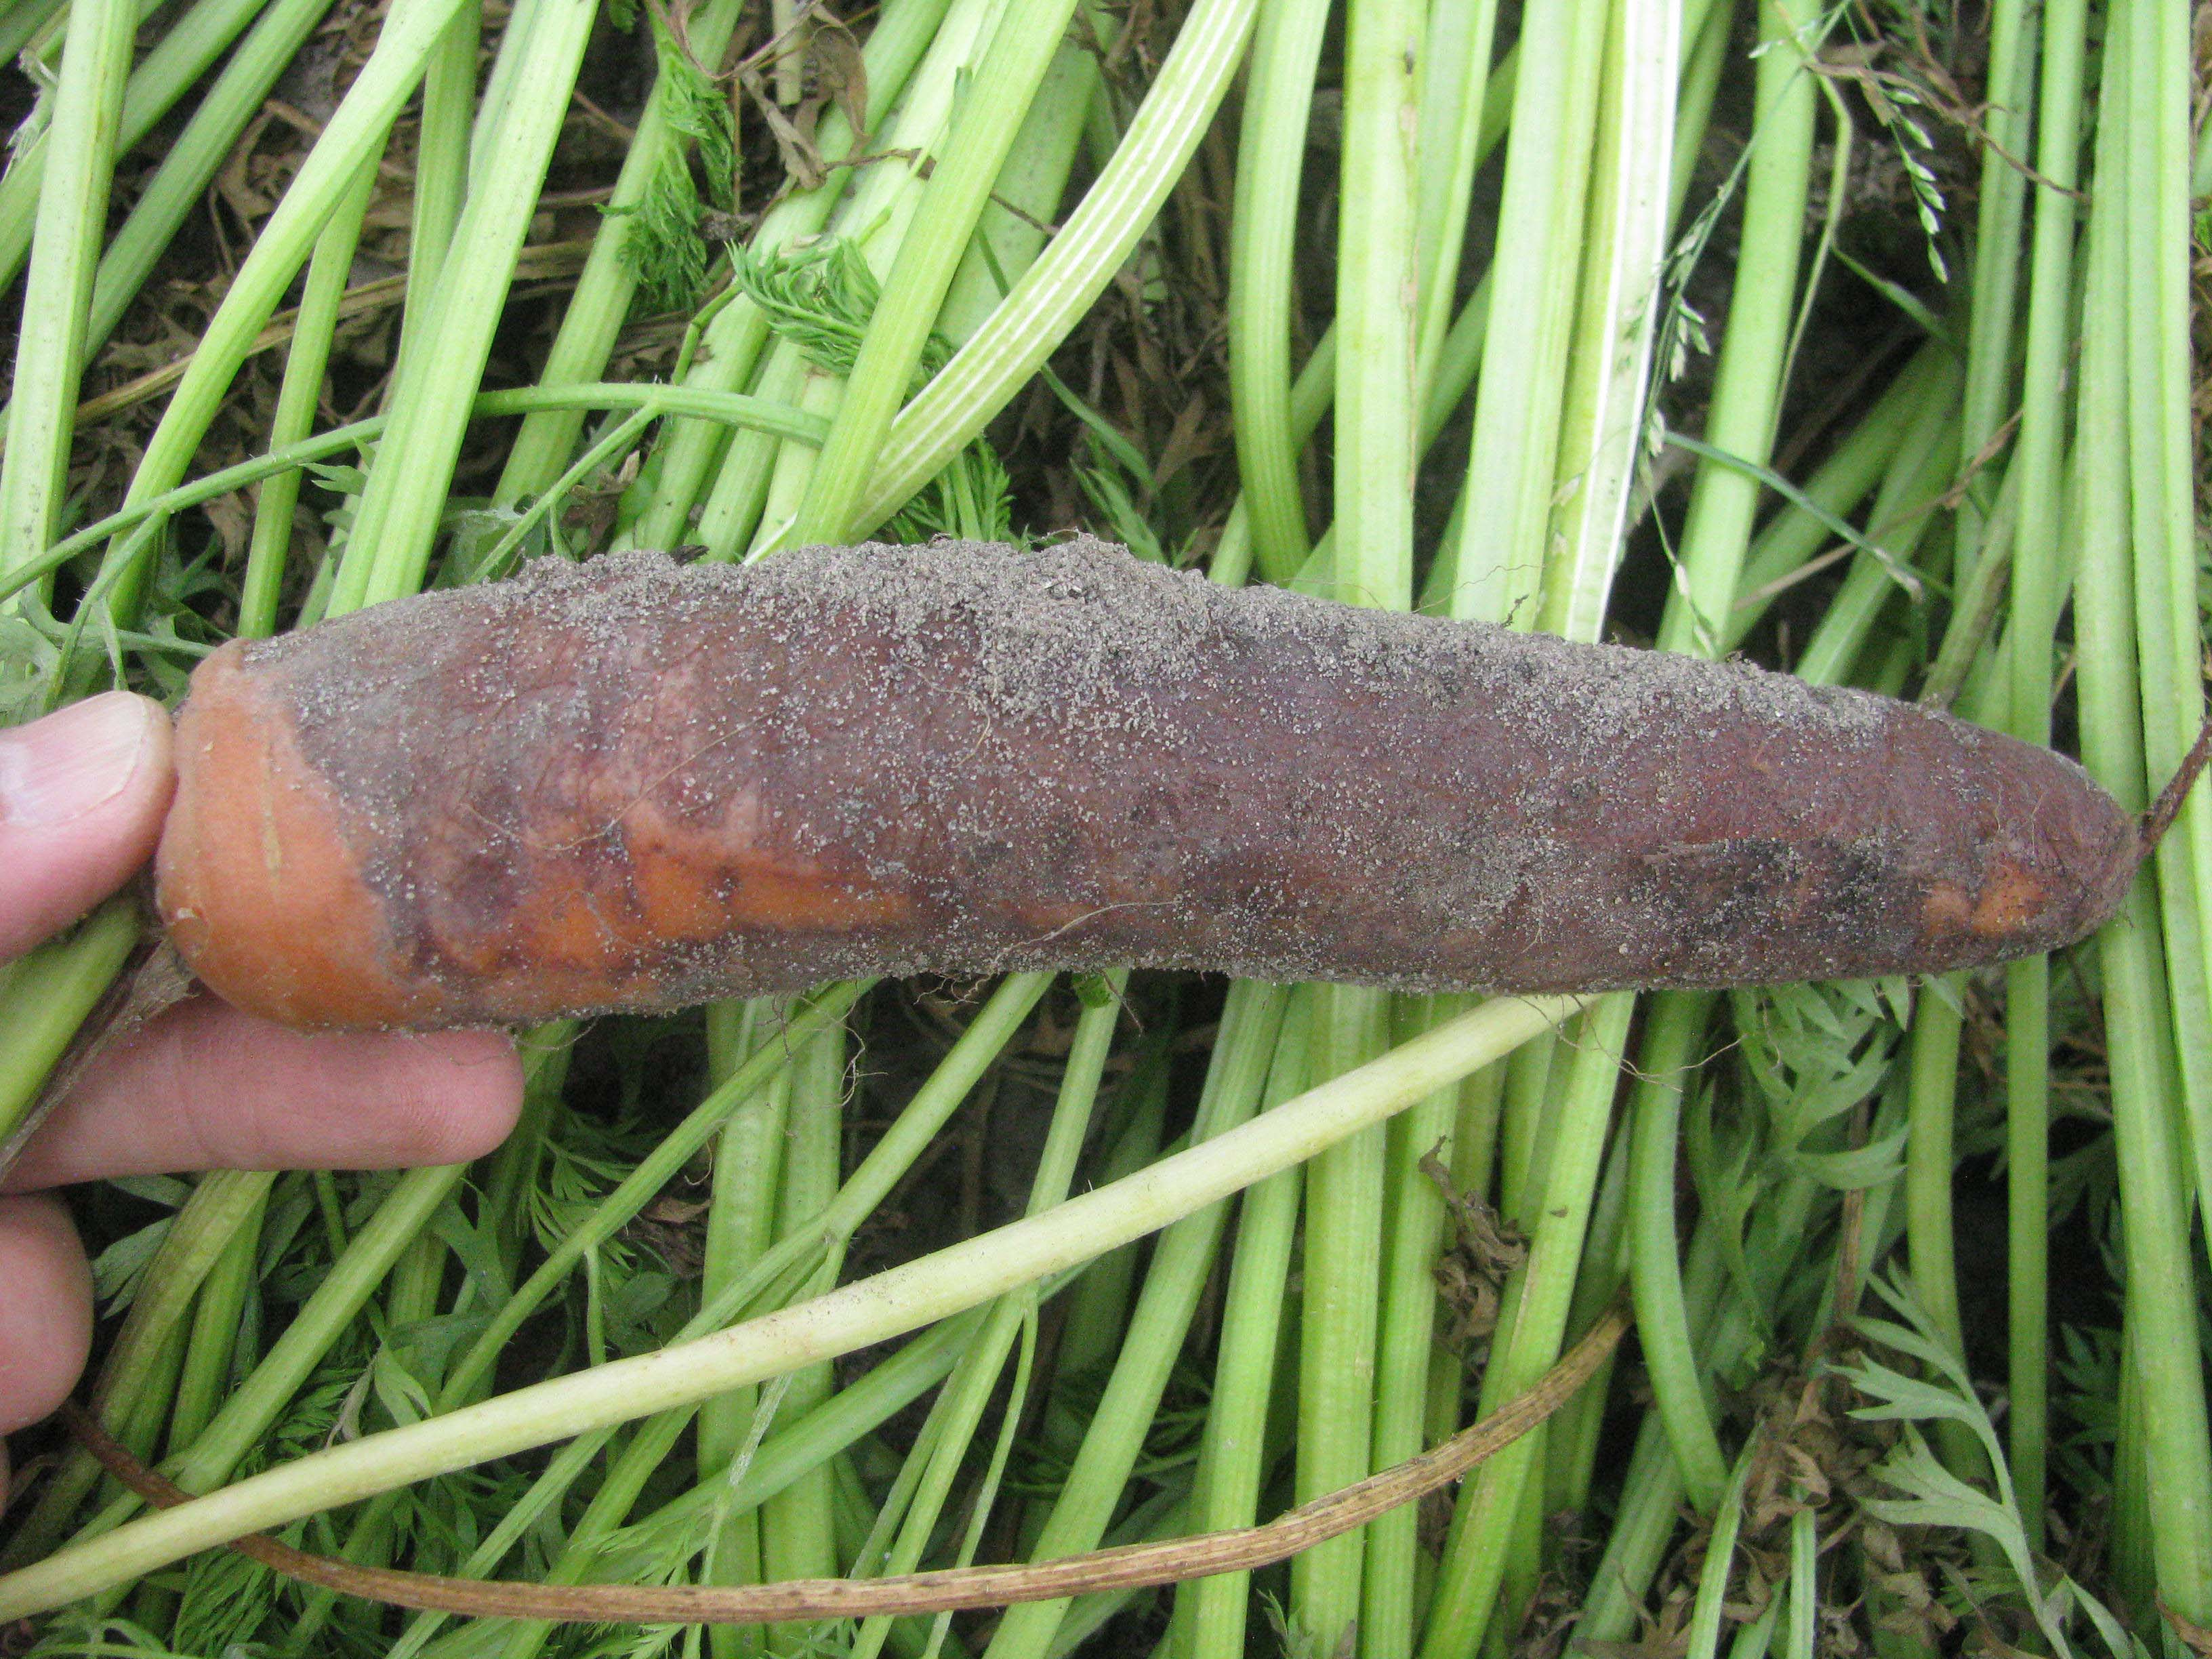 Severe symptoms of violet root rot on carrot.